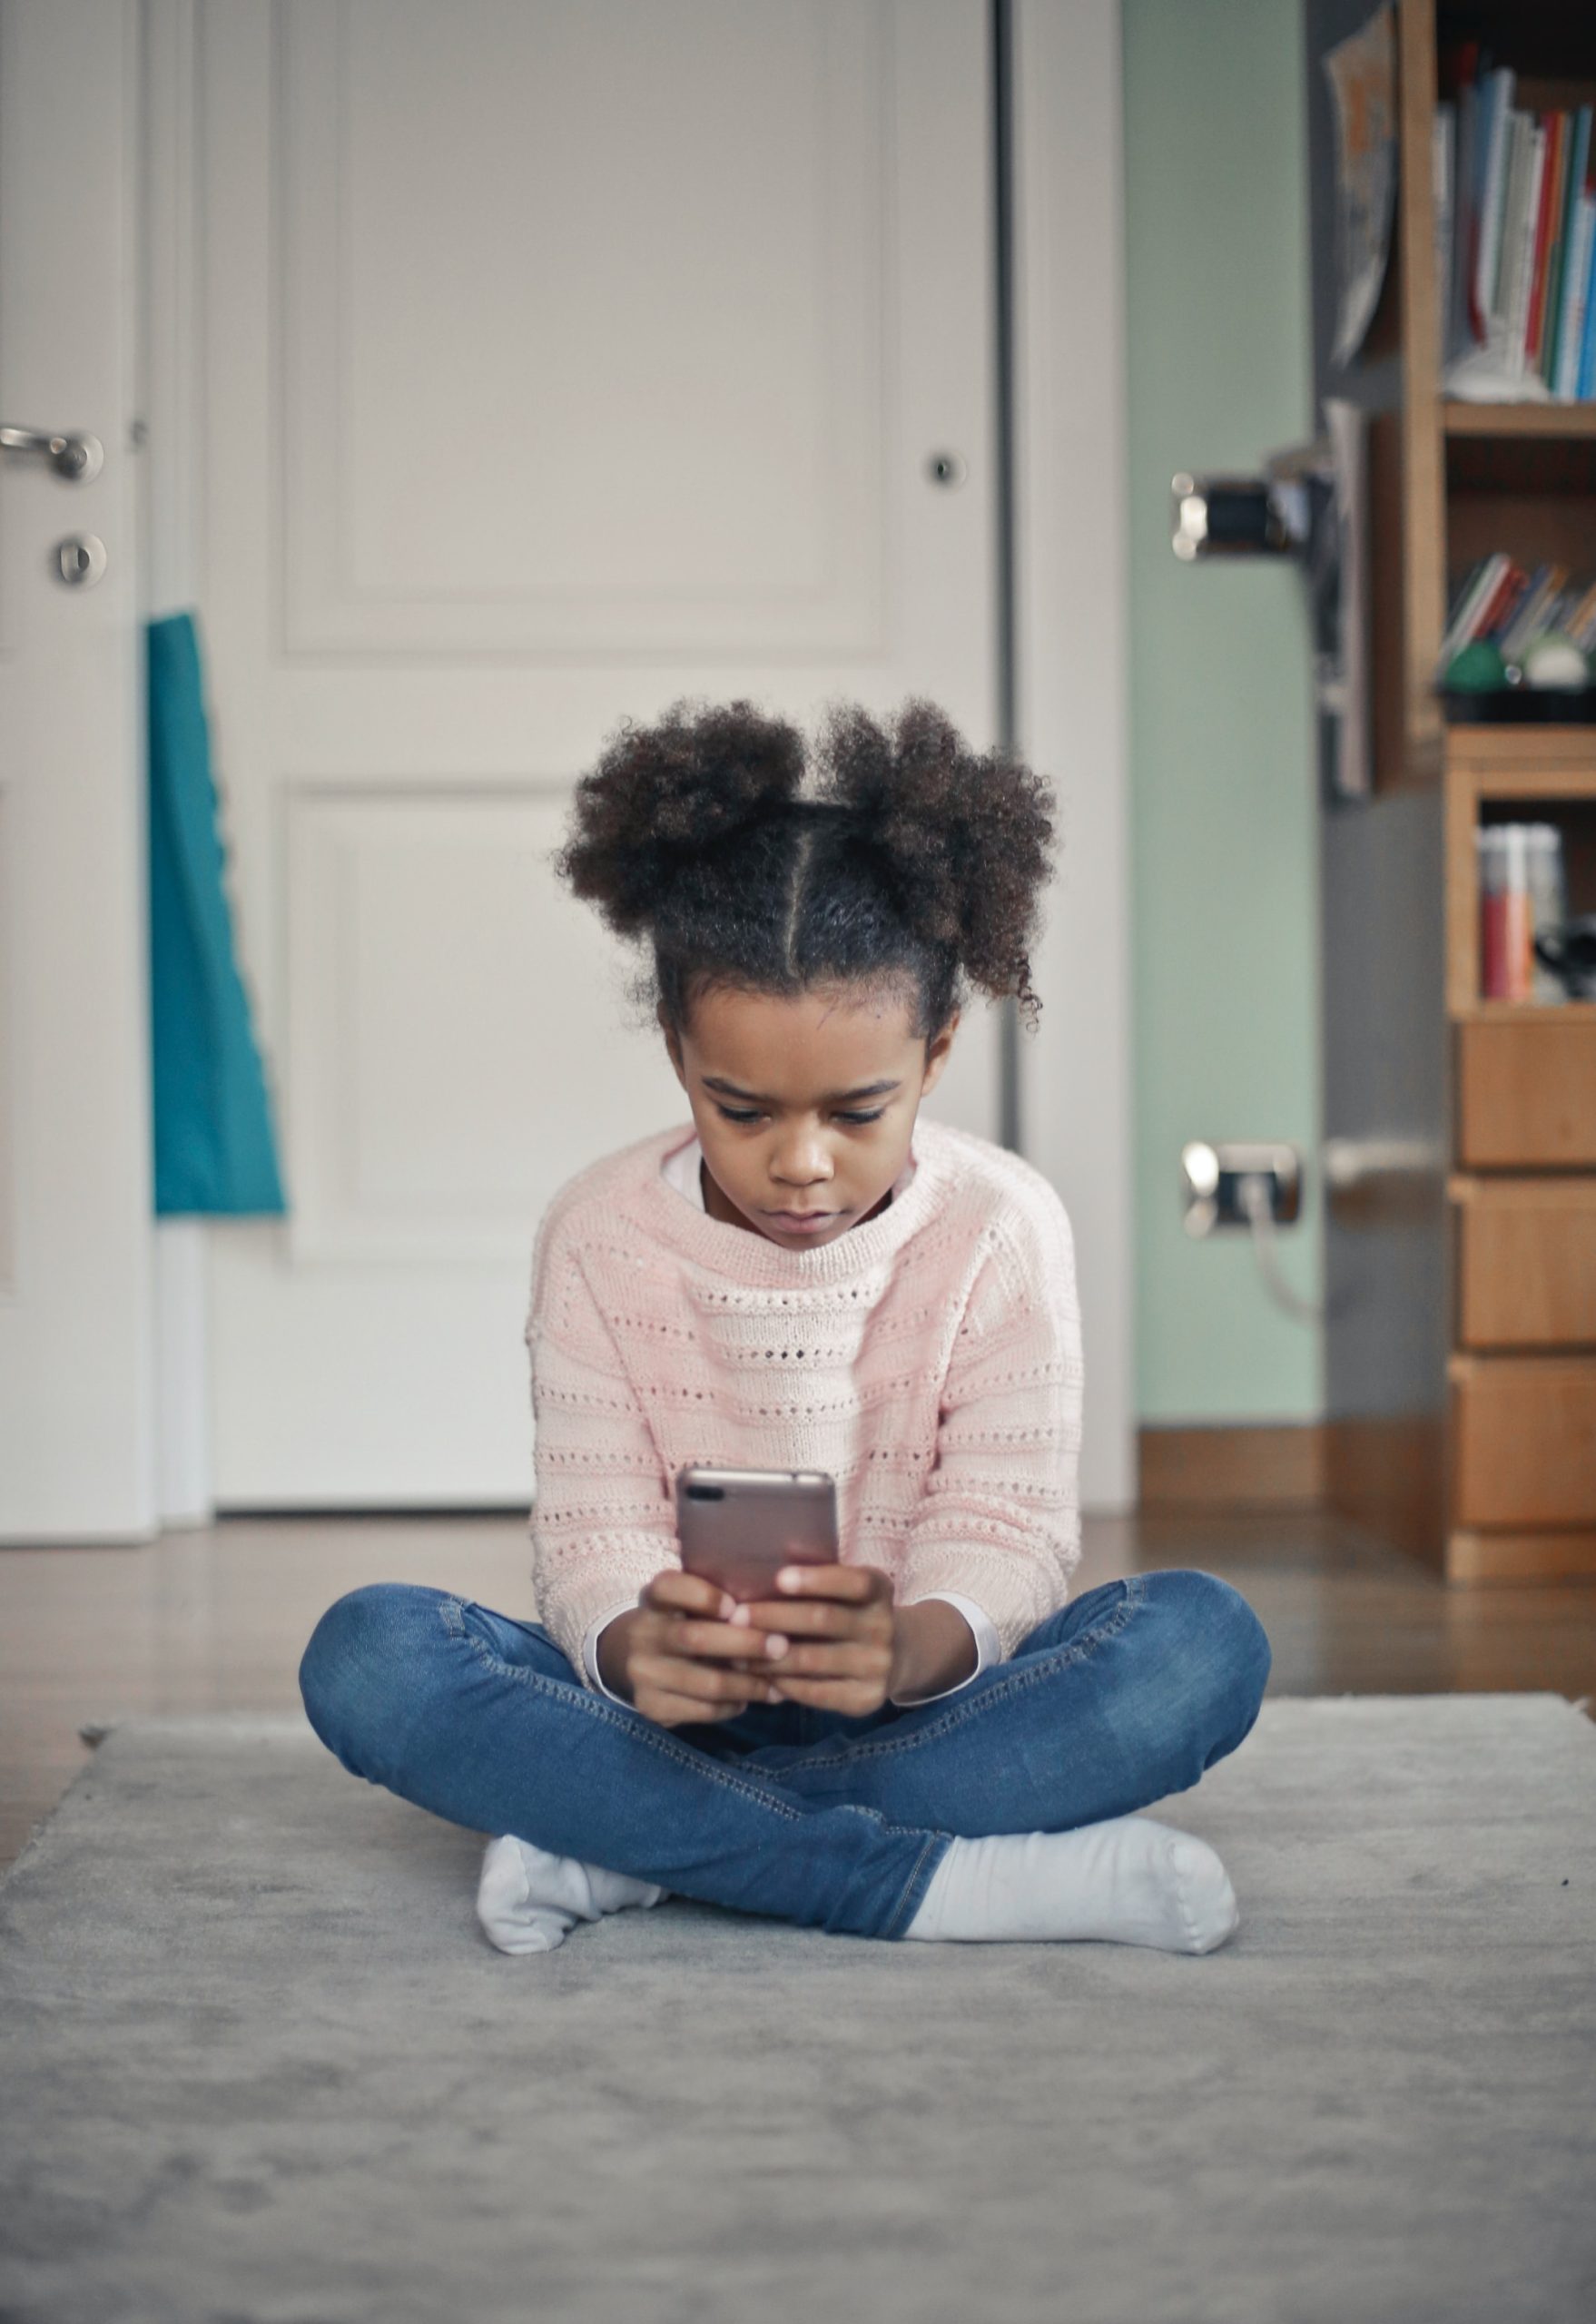 Teaching Kids to Be Good Digital Citizens: Strategies and Resources